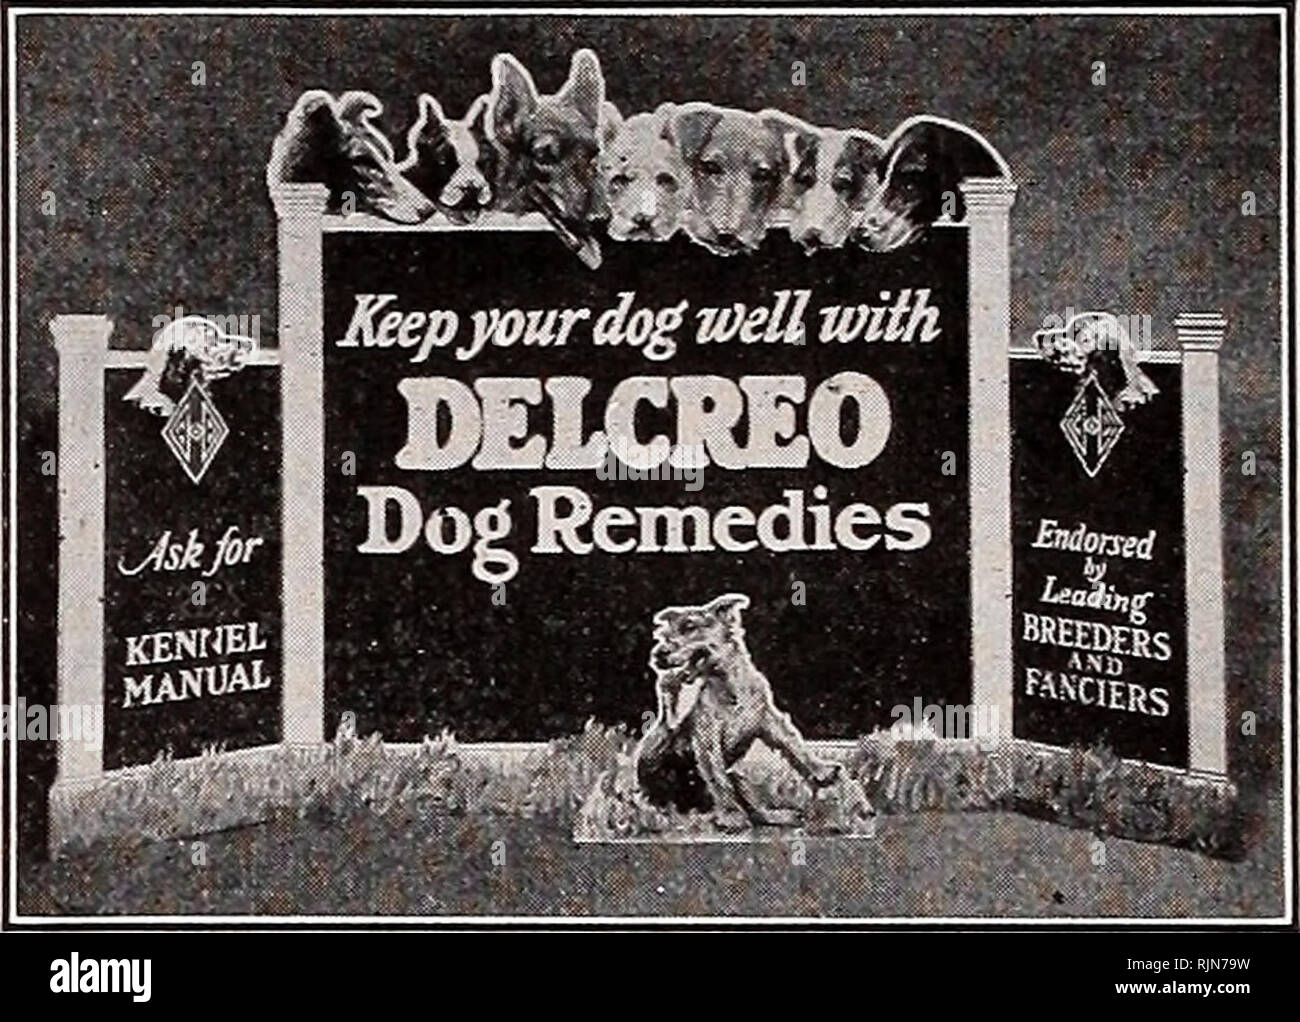 . Bailey's seeds : above them all. Page 66 BAILEY'S ANNUAL SPRING CATALOG FOR 1931 Bailey's Dog Food Remedies and The latest and most successful means of combating disease among animals. Never fails when administered in time and according to directions. Used and recommended by the leading breeders and fanciers. The reputation which Delcreo Dog Remedies has gained throughout the United States is a sufficient guarantee of their excellence. COMPLETE LINE OF DEL- CREO DOG REMEDIES DELCREO. For distemper, pneumonia, black tongue, colds, diarrhoea, auto-in- toxication and other diseases of germ orig Stock Photo